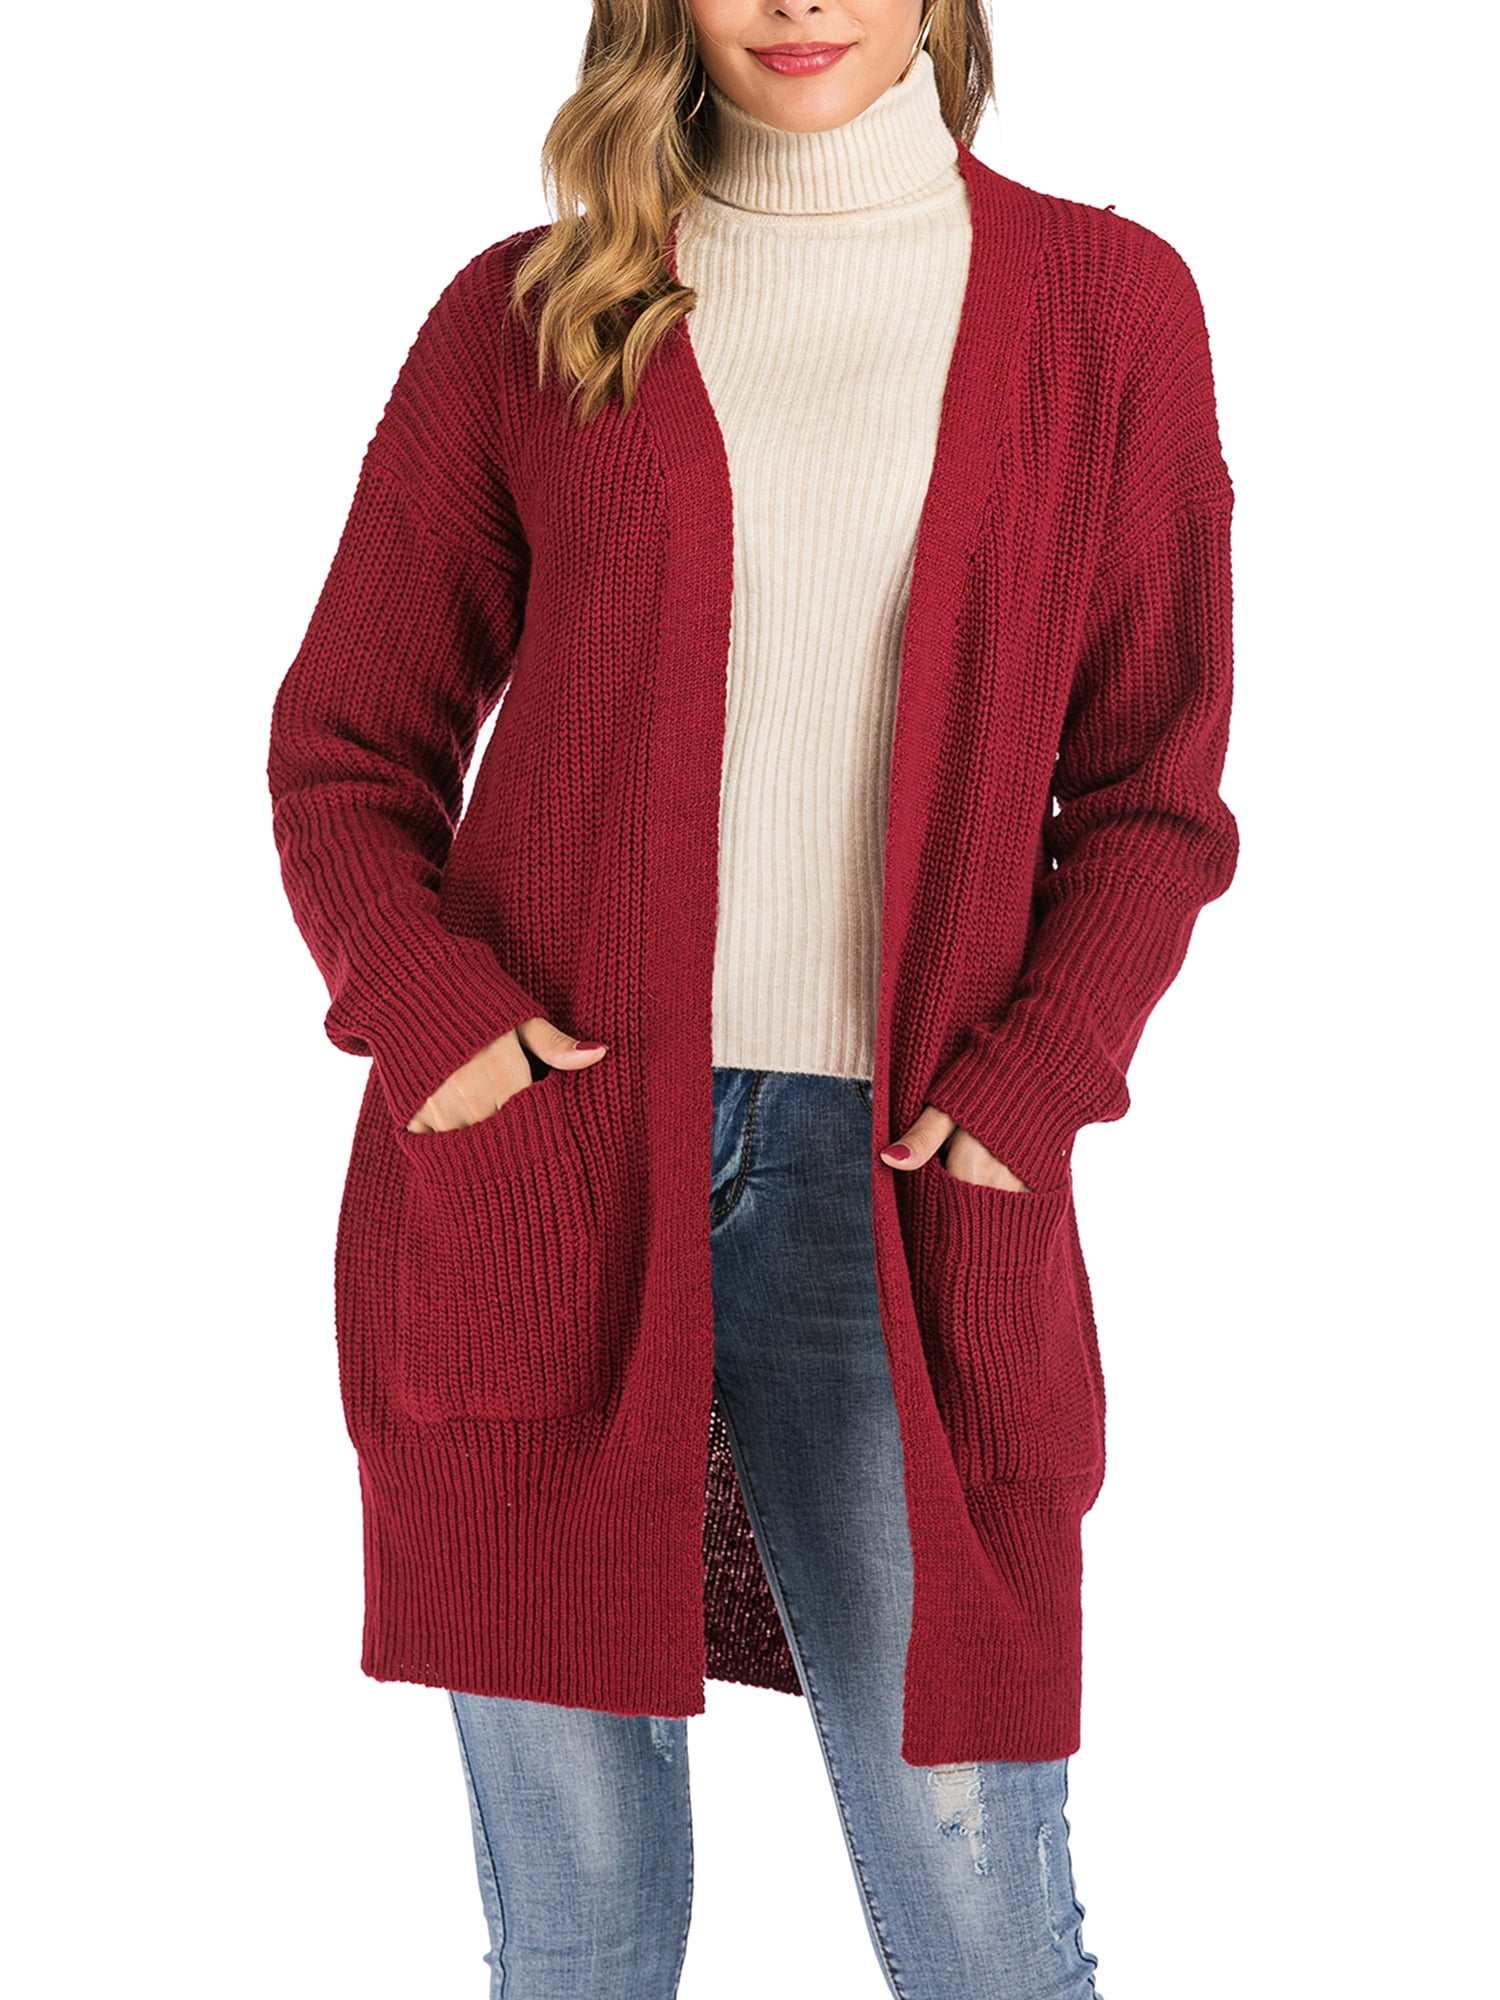 sayfut-women-s-open-front-duster-cardigan-long-sleeve-thin-sweater-loose-causal-lightweight